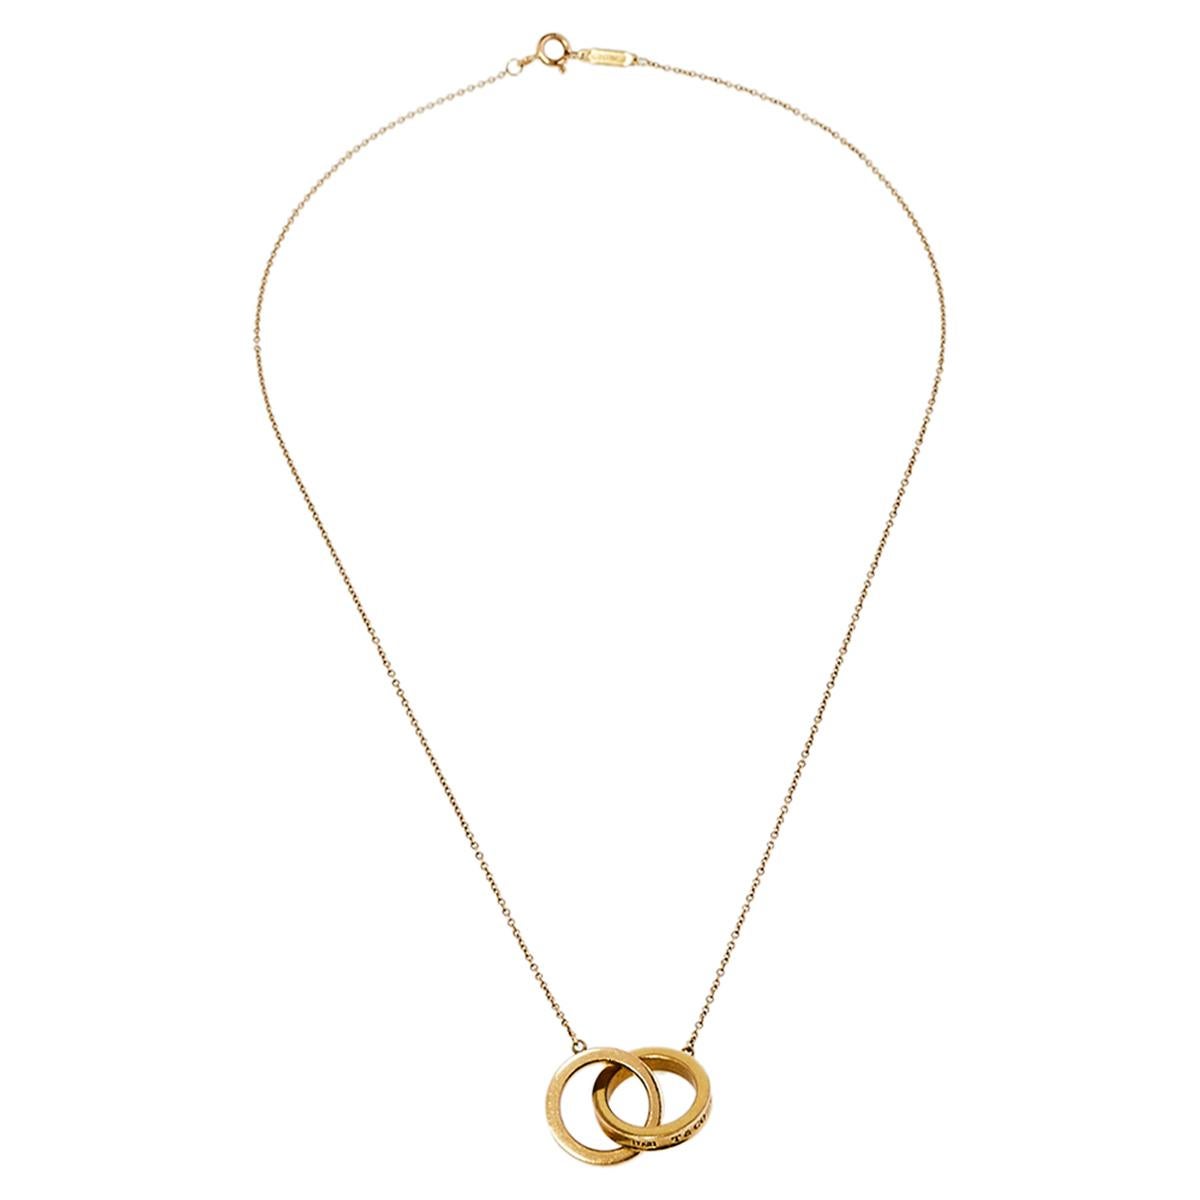 We can't help admiring this beauty from Tiffany & Co.! Beautifully crafted from 18k yellow gold, this necklace is a stunner. It has been gloriously styled with a pendant of interlocking rings. The pendant, inscribed with 1837, which is the year the